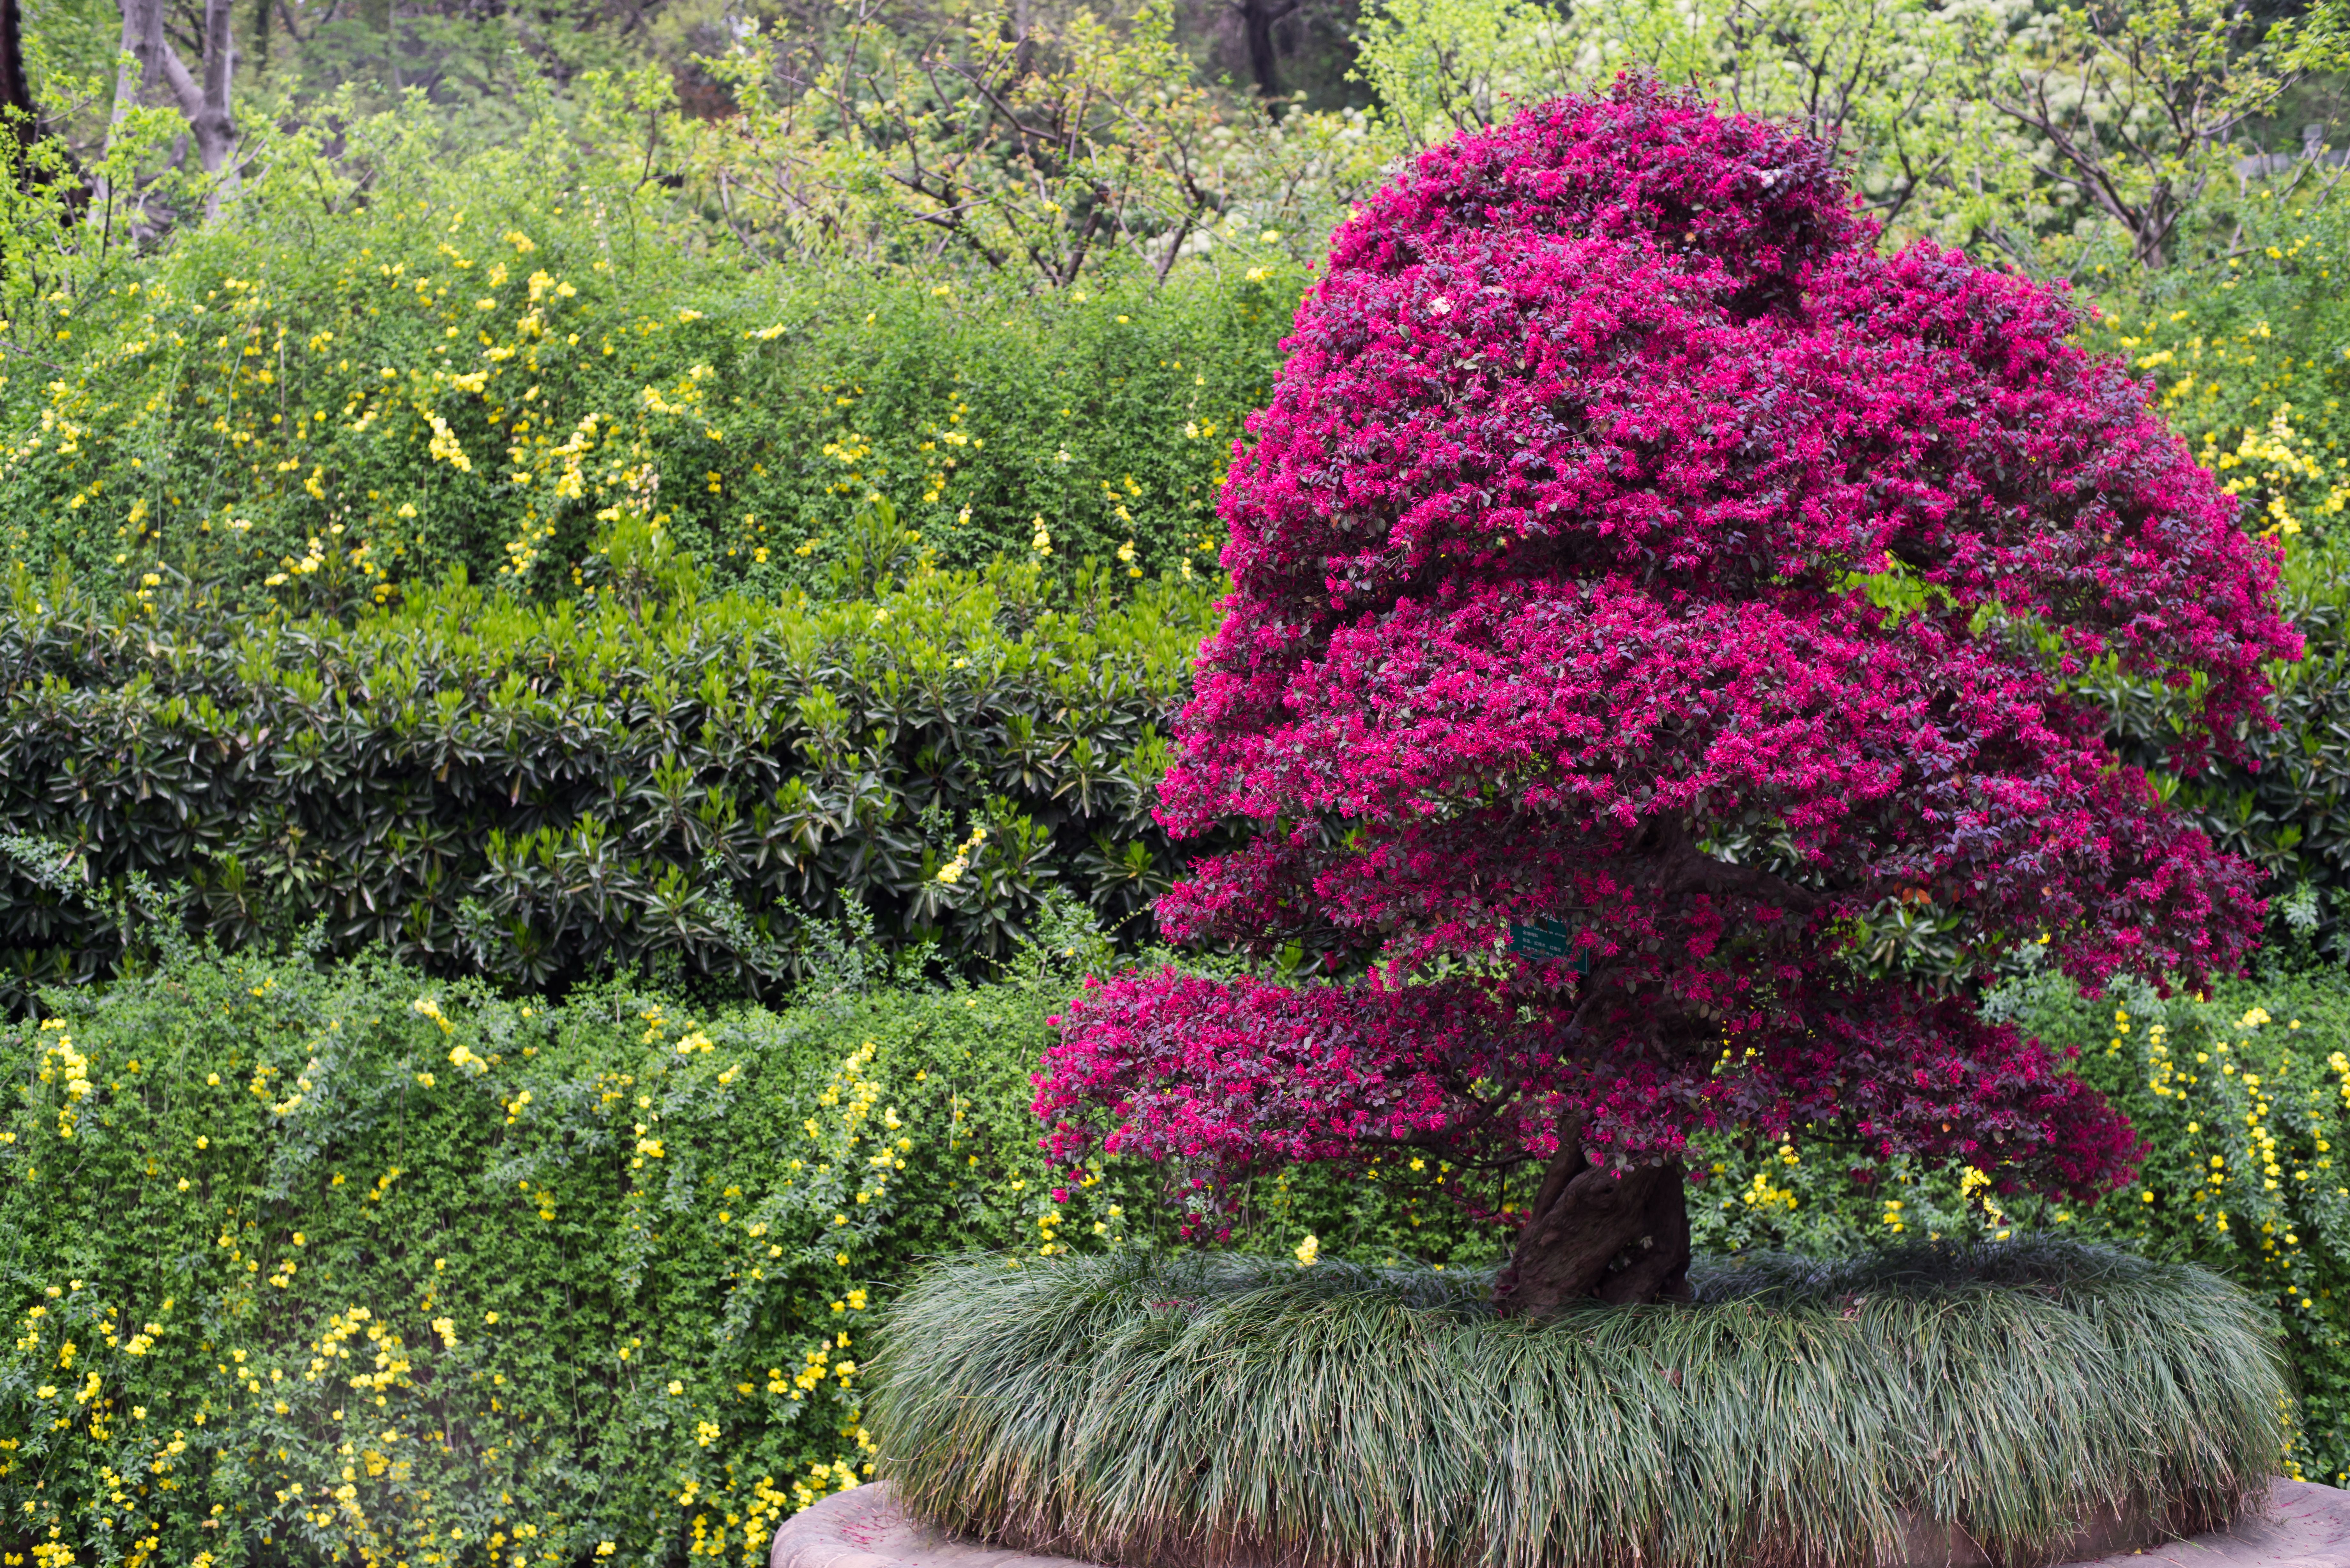 Large bonsai blossoming in maroon colored flowers situated outdoor with bush on the background